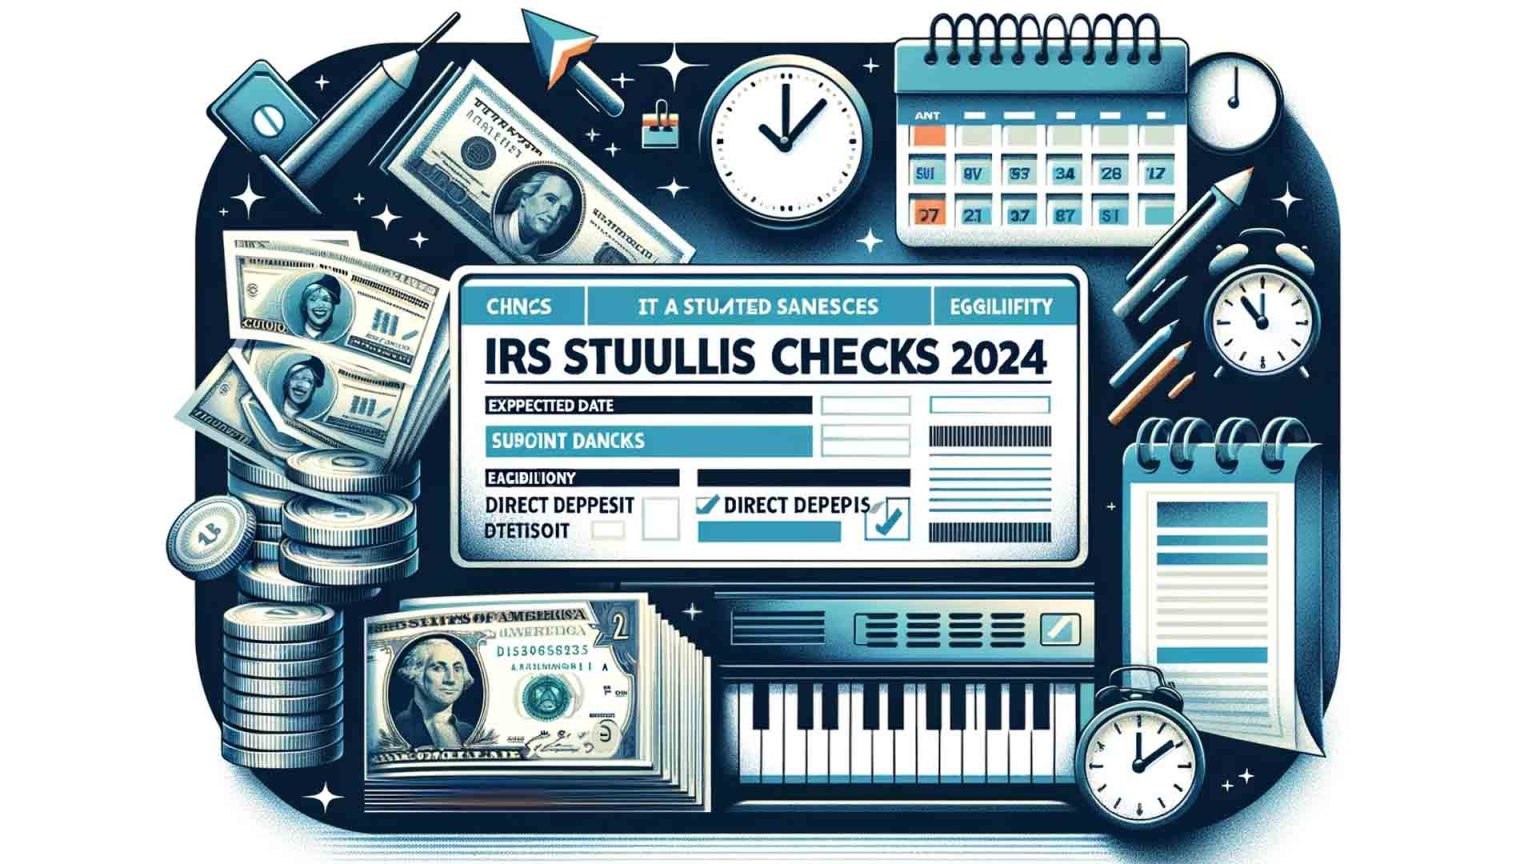 IRS Stimulus Checks 2024 Expected Date, Direct Deposit, and Eligibility?